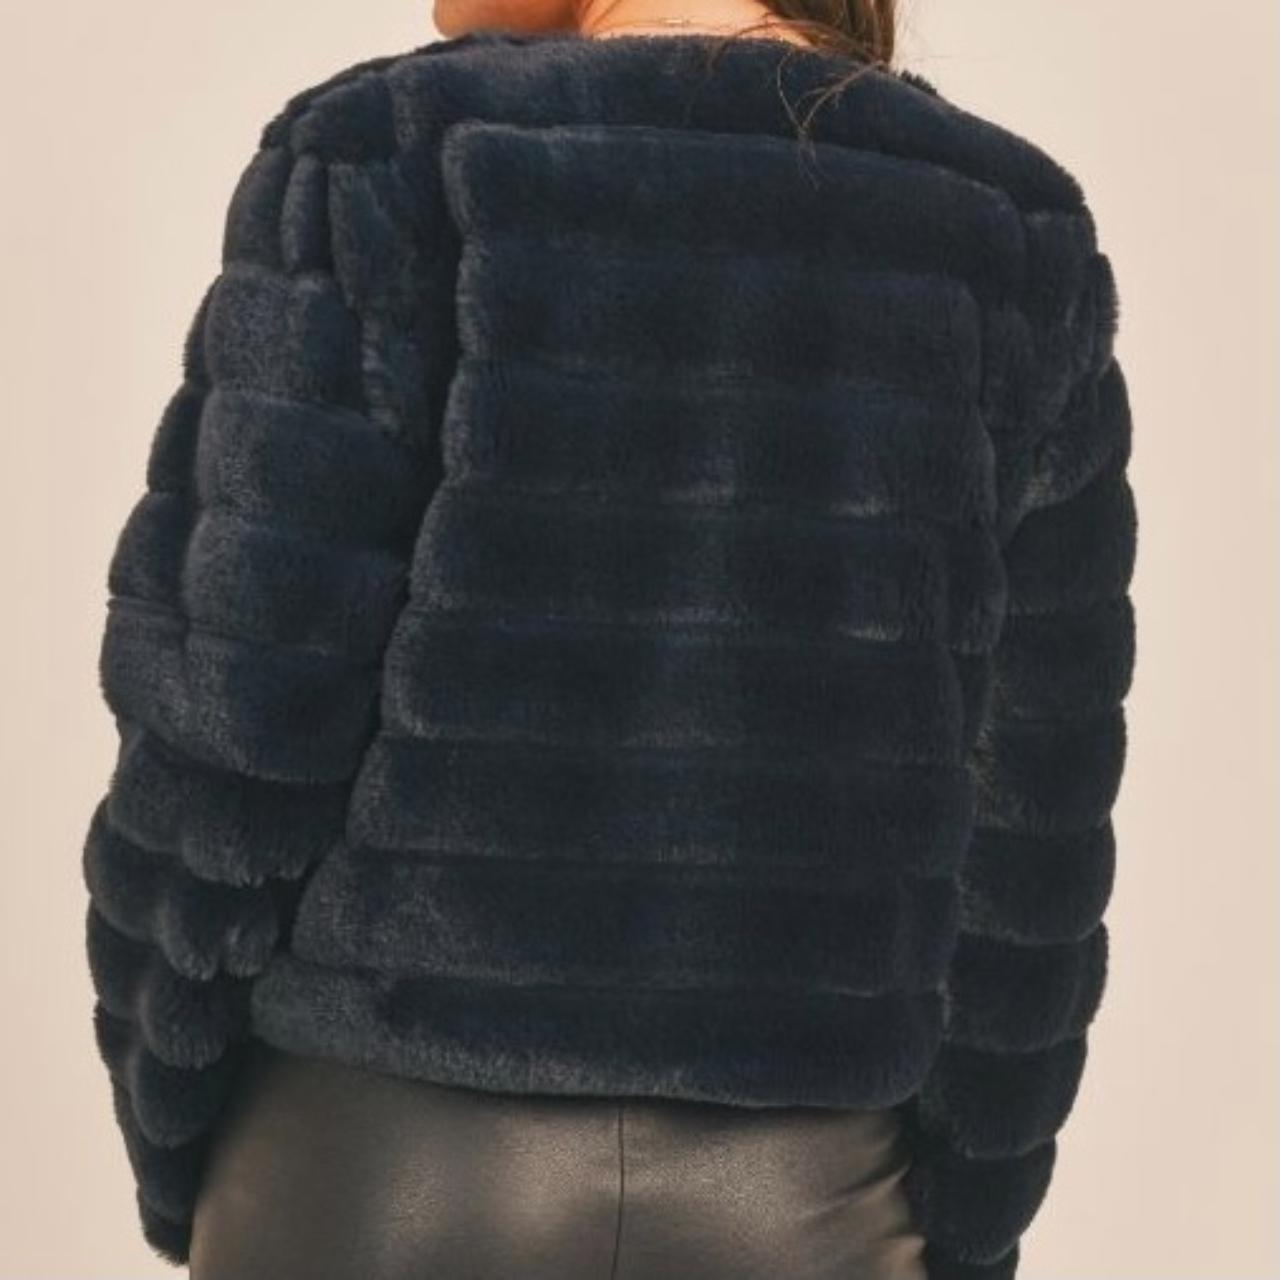 Product Image 2 - CHIC BLACK BUBBLE PATTERN FUZZY